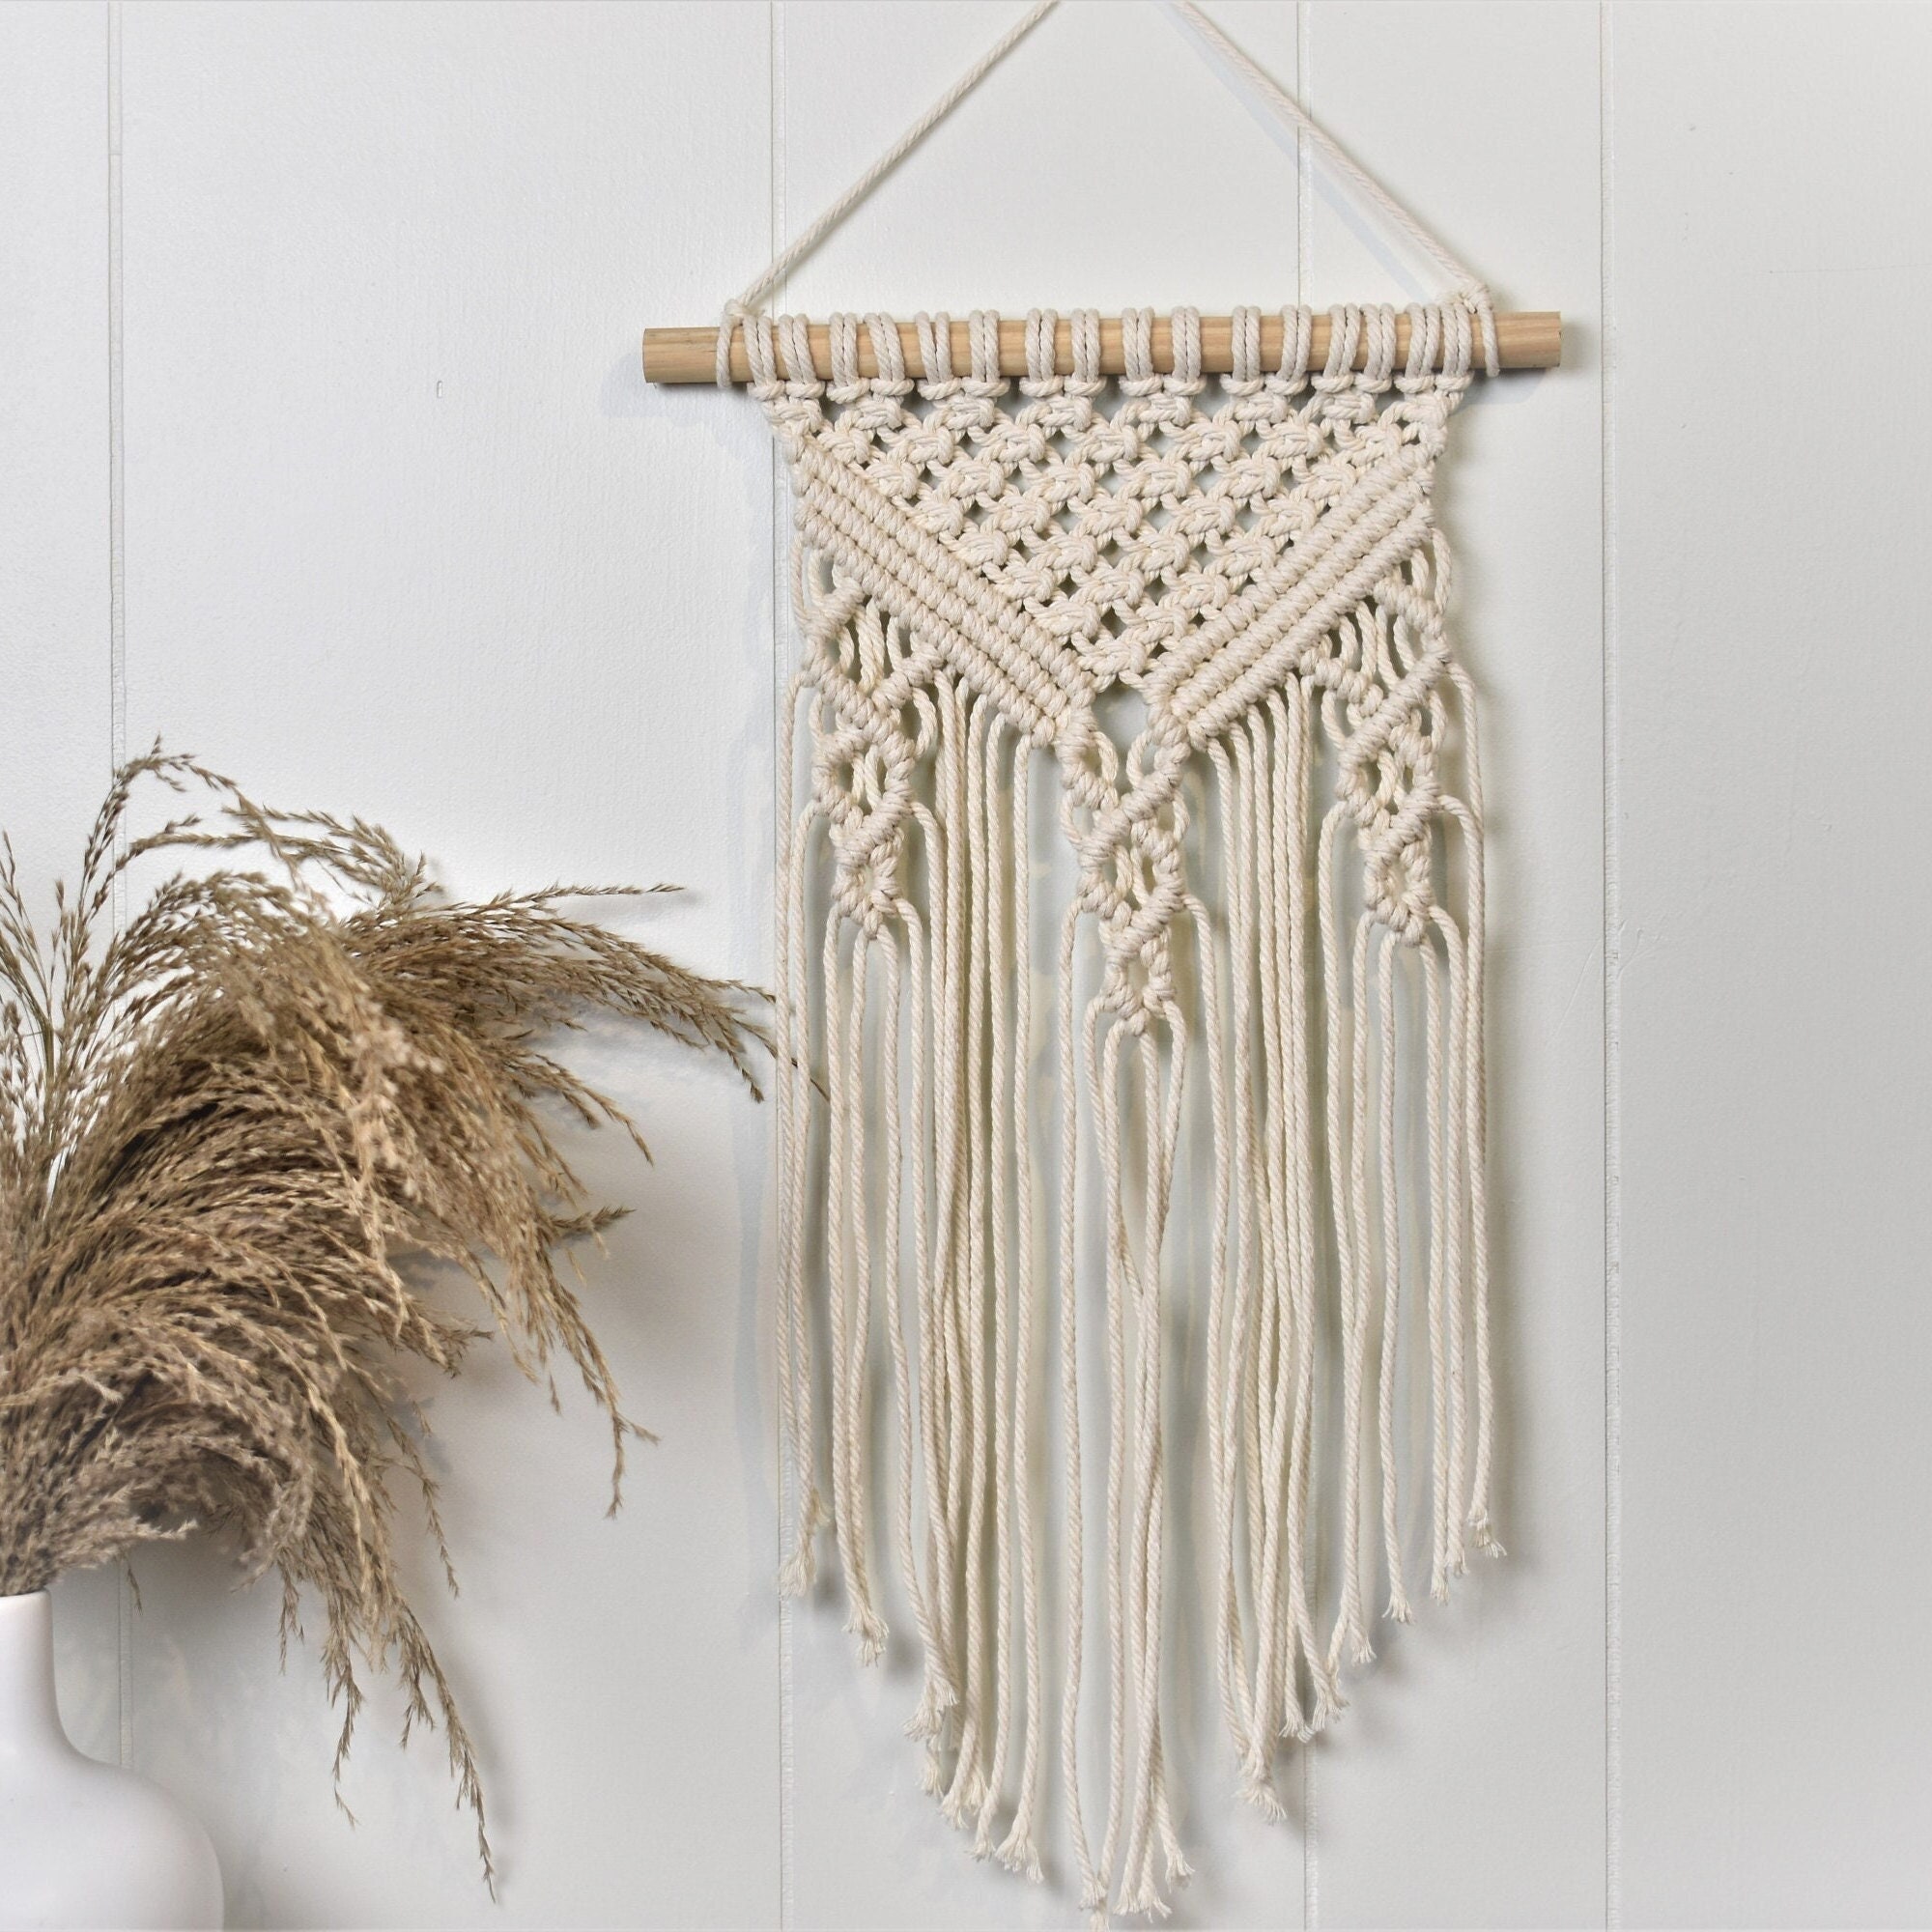 DIY Macrame Kit, Gift for Mom, Small Macrame Wall Hanging Kit by KNOT It  Yourself 